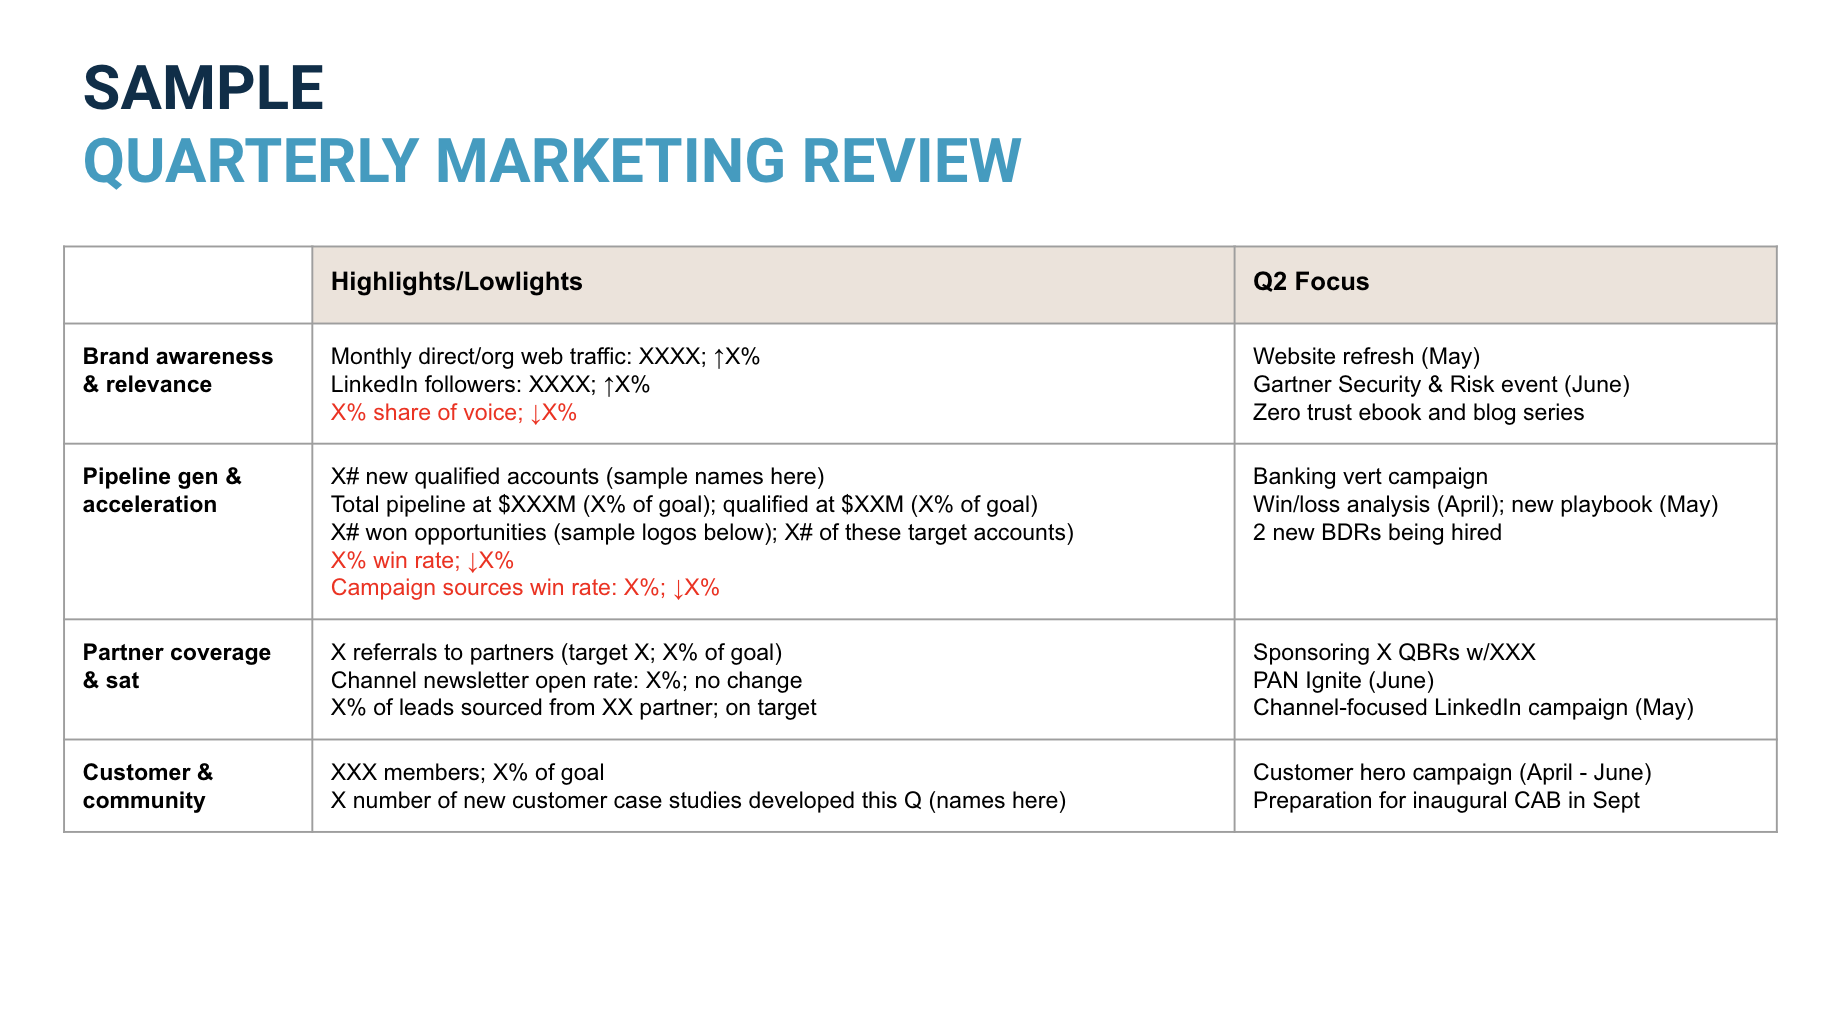 A sample quarterly marketing review with highlights and lowlights.